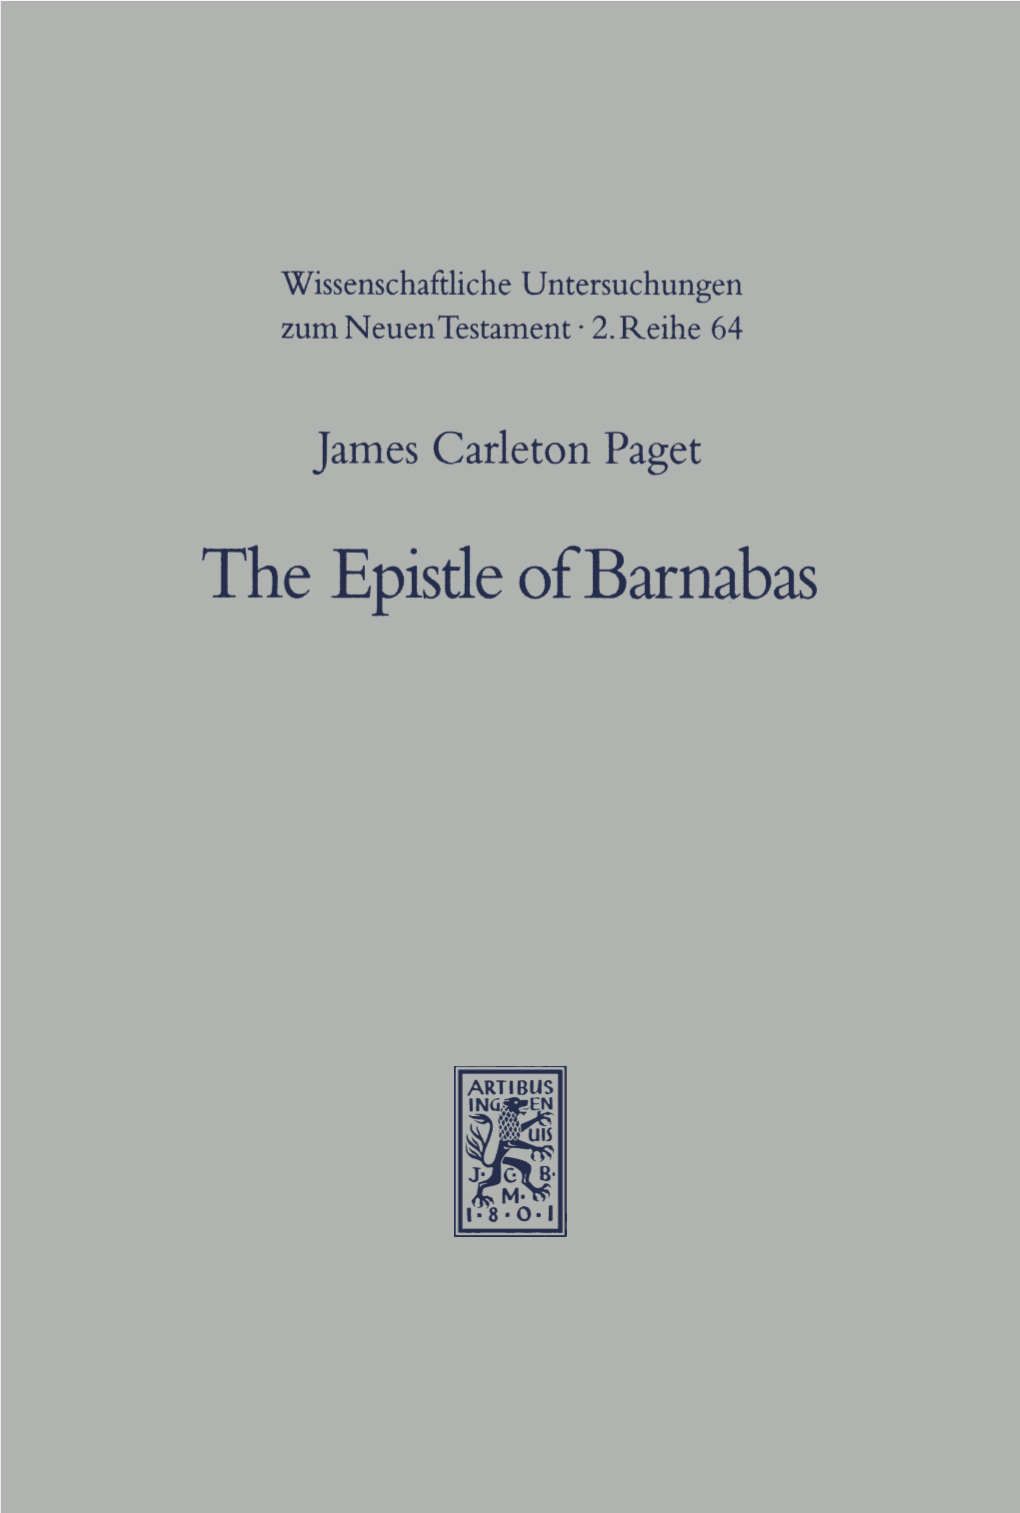 The Epistle of Barnabas. Outlook and Background